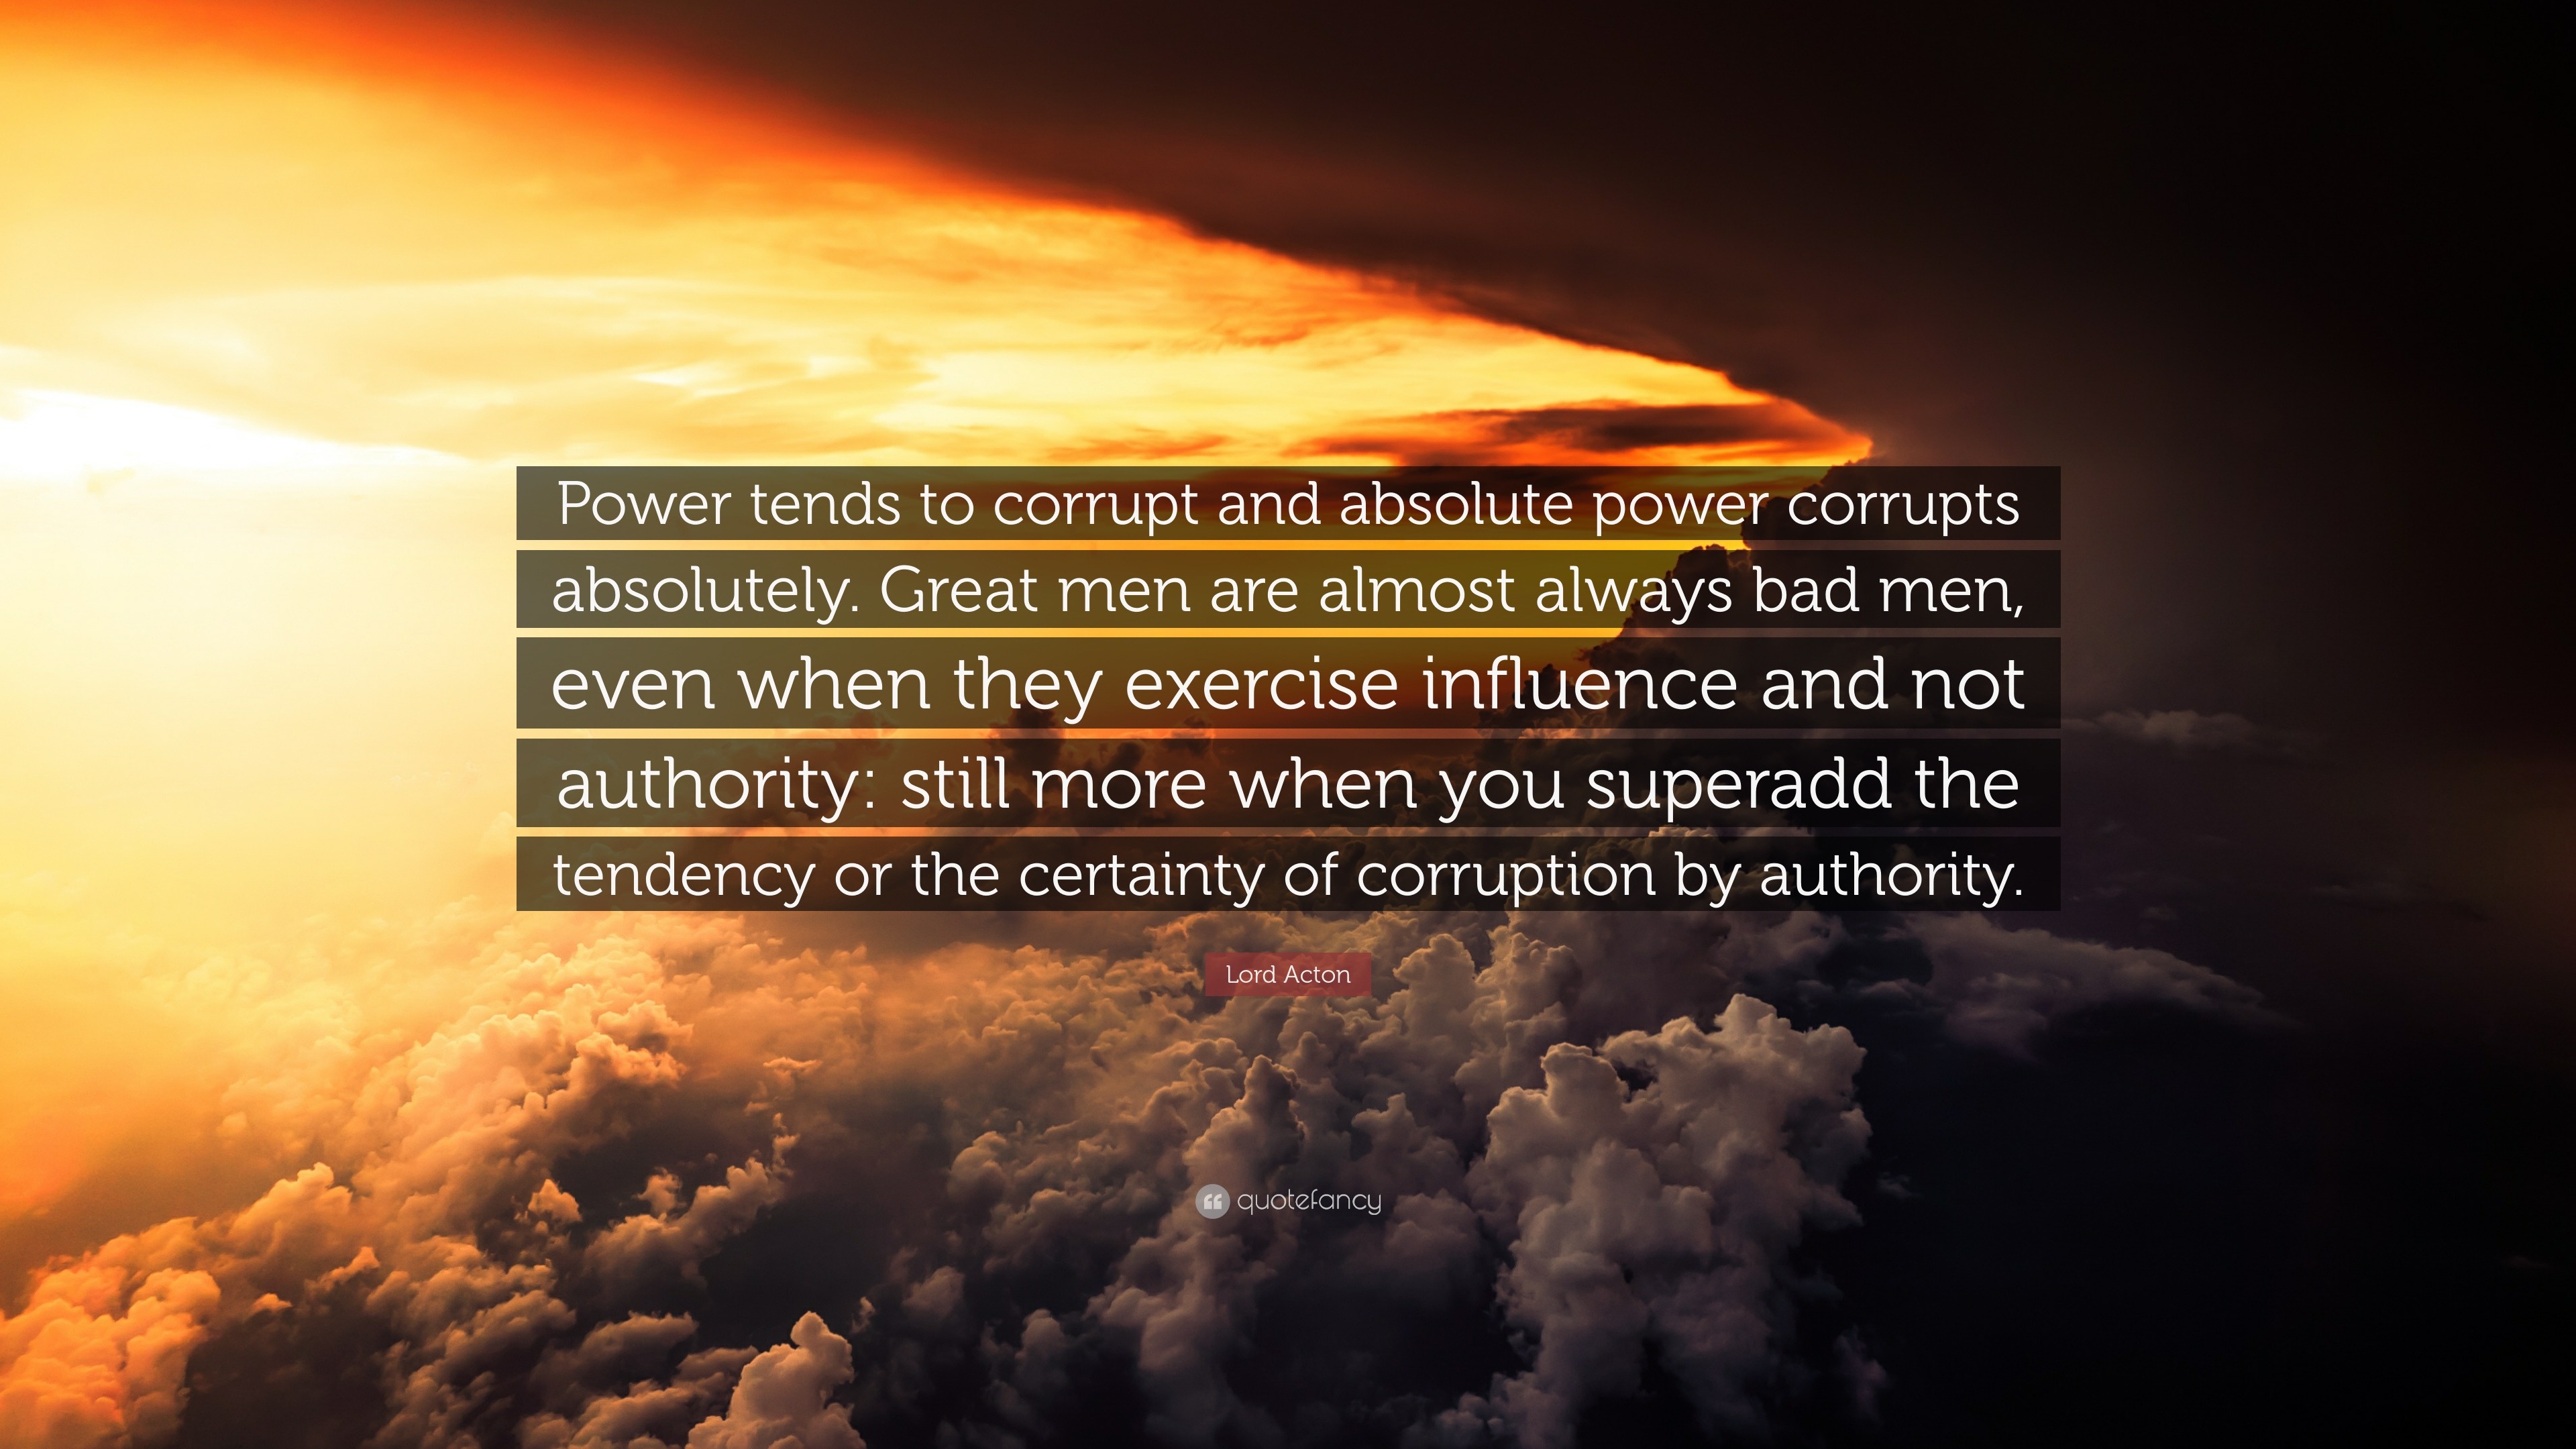 power tends to corrupt and absolute power corrupts absolutely